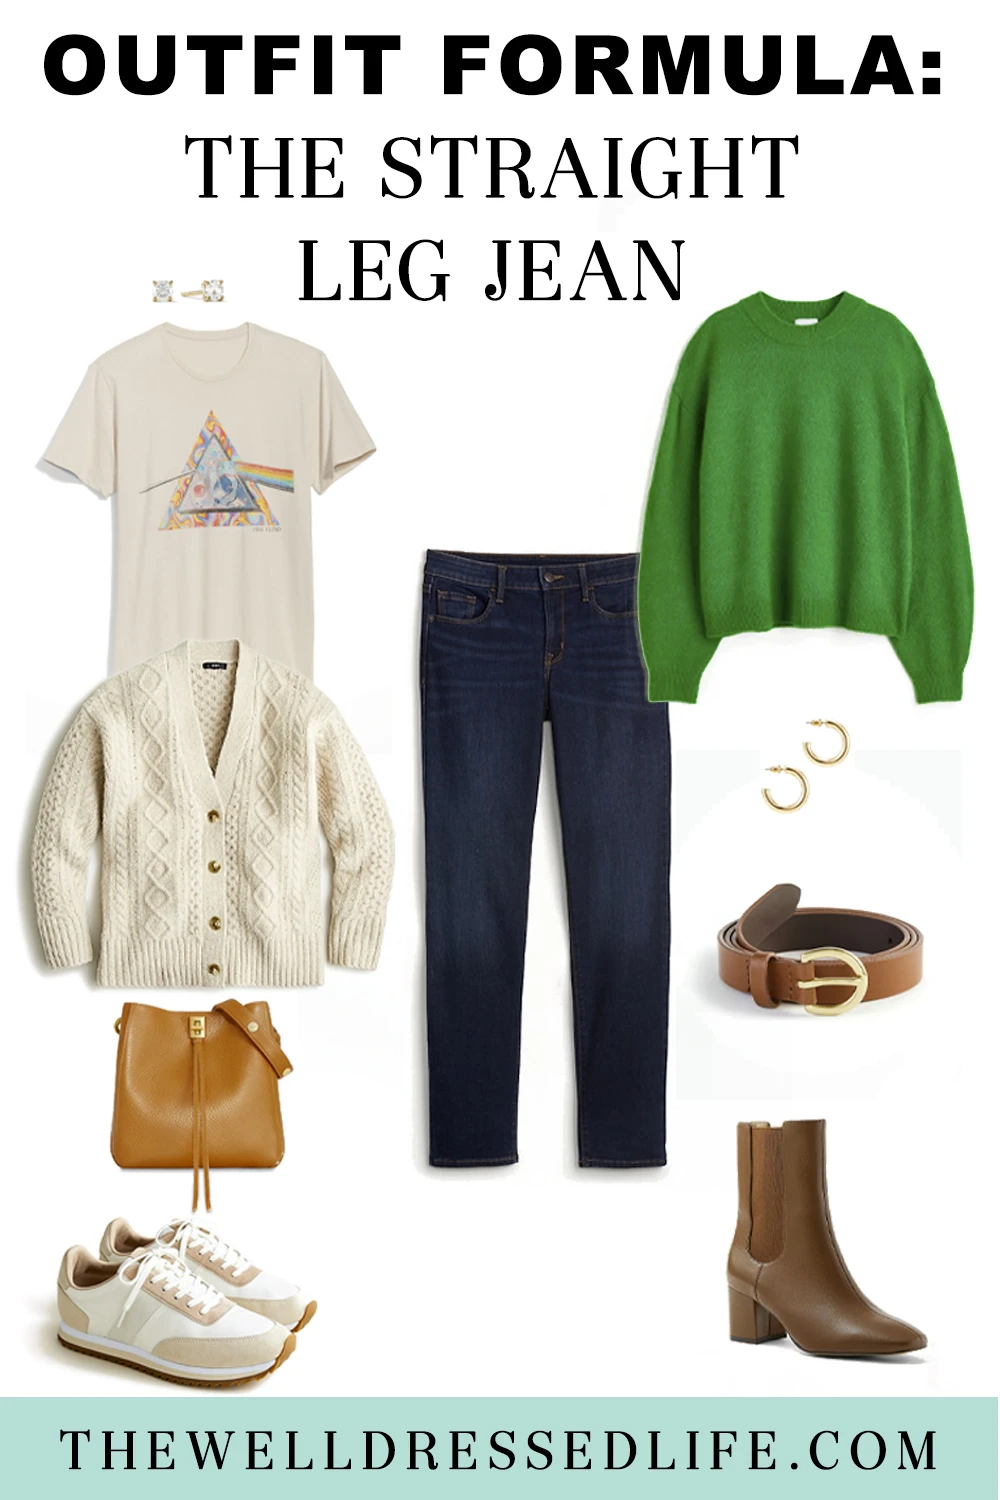 Outfit Formula: The Straight Leg Jean